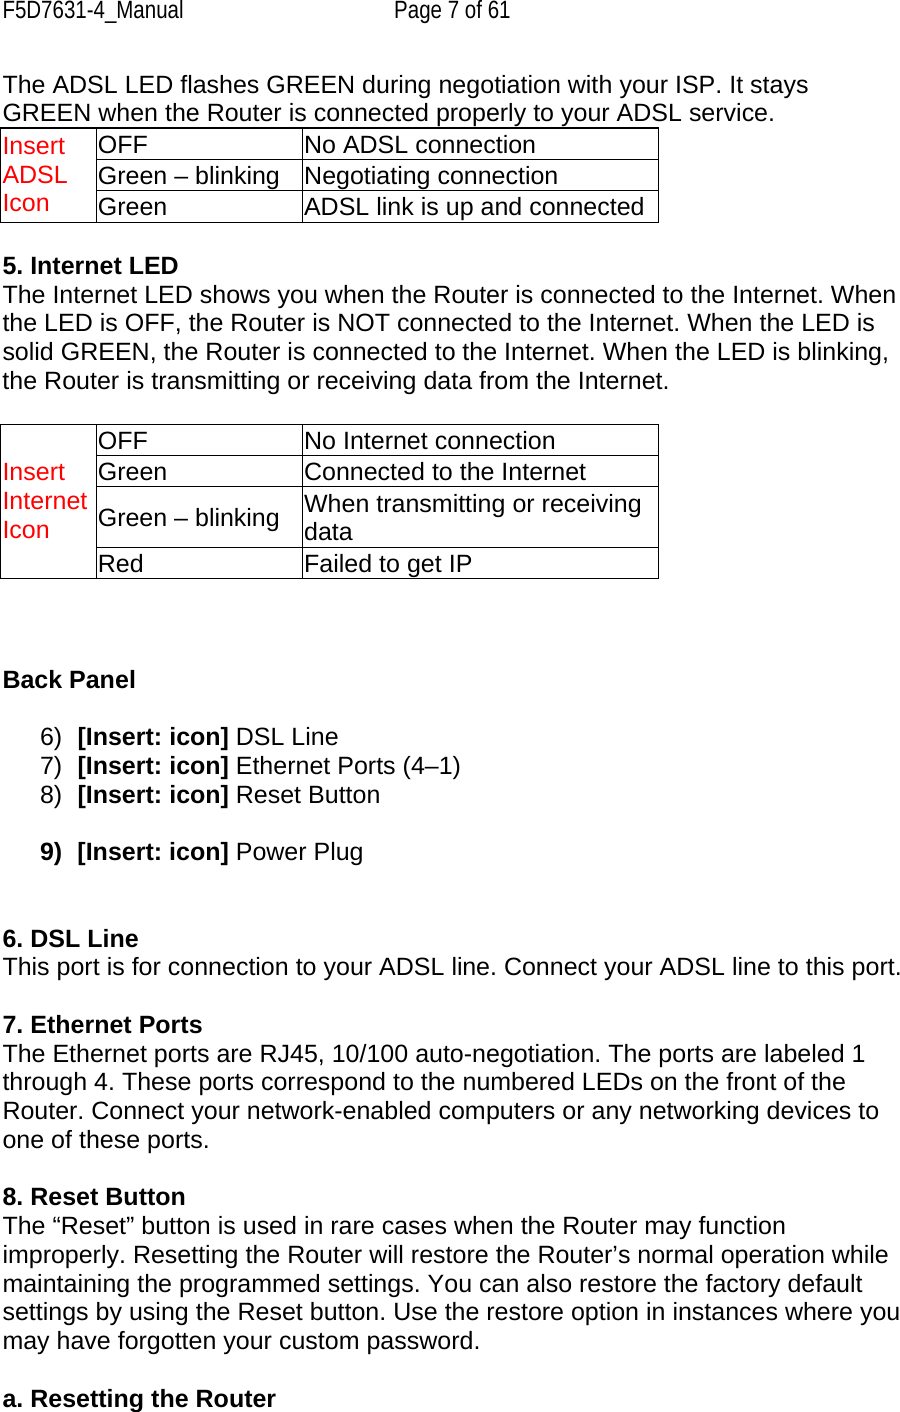 F5D7631-4_Manual  Page 7 of 61 The ADSL LED flashes GREEN during negotiation with your ISP. It stays GREEN when the Router is connected properly to your ADSL service. OFF  No ADSL connection Green – blinking  Negotiating connection  Insert ADSL Icon  Green   ADSL link is up and connected 5. Internet LED  The Internet LED shows you when the Router is connected to the Internet. When the LED is OFF, the Router is NOT connected to the Internet. When the LED is solid GREEN, the Router is connected to the Internet. When the LED is blinking, the Router is transmitting or receiving data from the Internet.  OFF  No Internet connection Green Connected to the Internet Green – blinking  When transmitting or receiving data Insert Internet Icon  Red  Failed to get IP    Back Panel  6)  [Insert: icon] DSL Line  7)  [Insert: icon] Ethernet Ports (4–1) 8)  [Insert: icon] Reset Button   9) [Insert: icon] Power Plug    6. DSL Line This port is for connection to your ADSL line. Connect your ADSL line to this port.  7. Ethernet Ports The Ethernet ports are RJ45, 10/100 auto-negotiation. The ports are labeled 1 through 4. These ports correspond to the numbered LEDs on the front of the Router. Connect your network-enabled computers or any networking devices to one of these ports.  8. Reset Button The “Reset” button is used in rare cases when the Router may function improperly. Resetting the Router will restore the Router’s normal operation while maintaining the programmed settings. You can also restore the factory default settings by using the Reset button. Use the restore option in instances where you may have forgotten your custom password.  a. Resetting the Router 